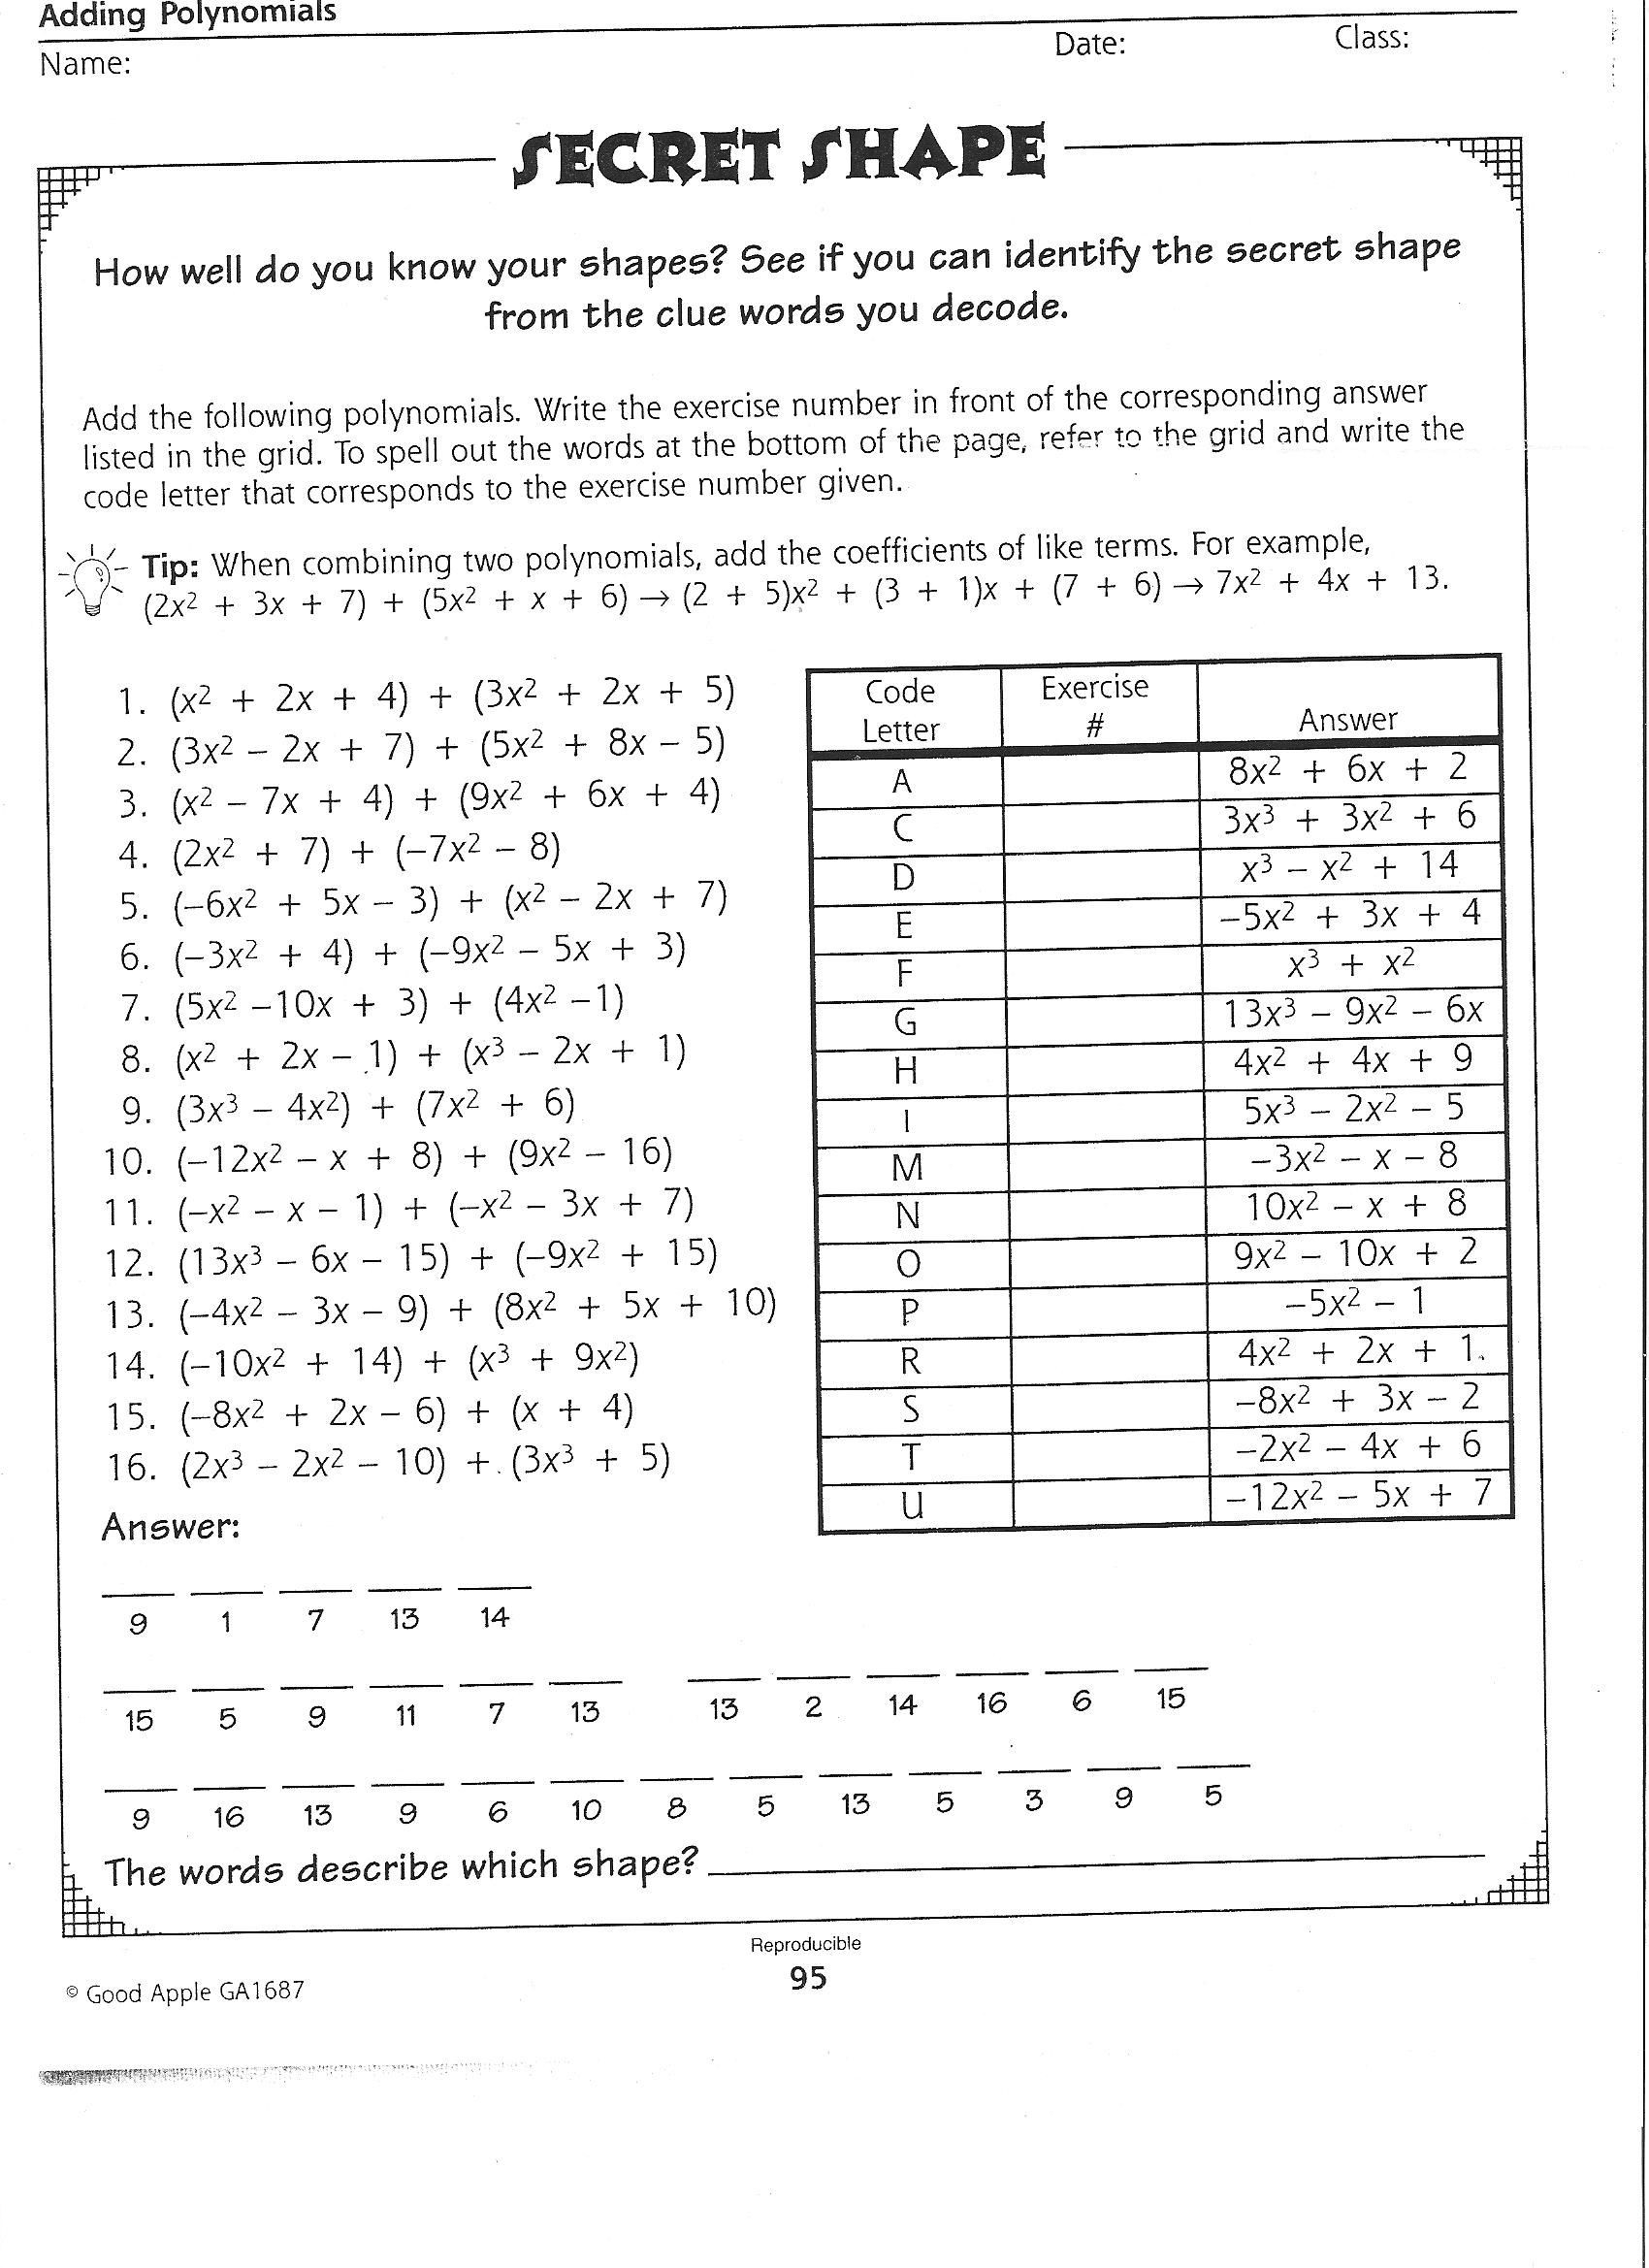 Adding and Subtracting Polynomials Worksheet Worksheet Adding Polynomials Jpg 17002338